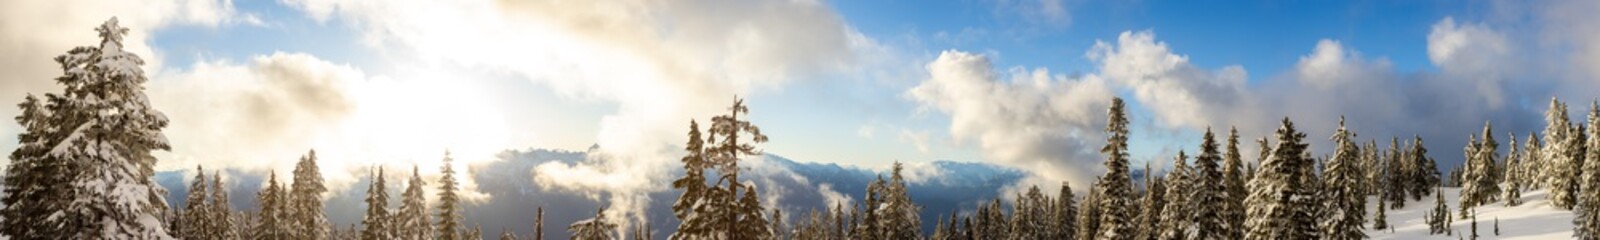 Panoramic View of Canadian Nature Landscape on top of snow covered mountain and green trees during spring sunset. Elfin Lake in Squamish, North of Vancouver, British Columbia, Canada.